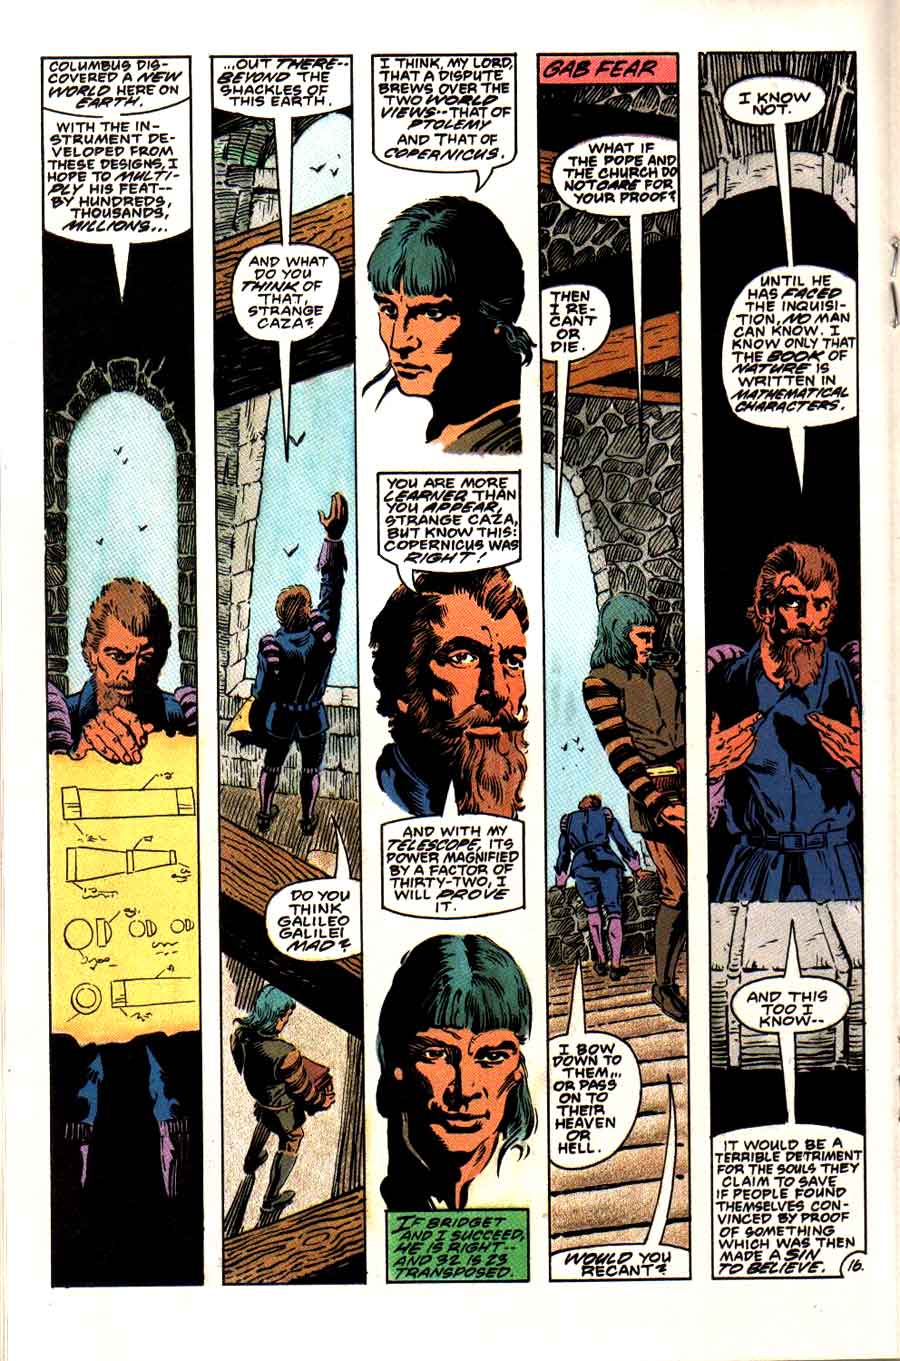 Aztec Ace #8 Eclipse 1980s comic book page art by Nestor Redondo